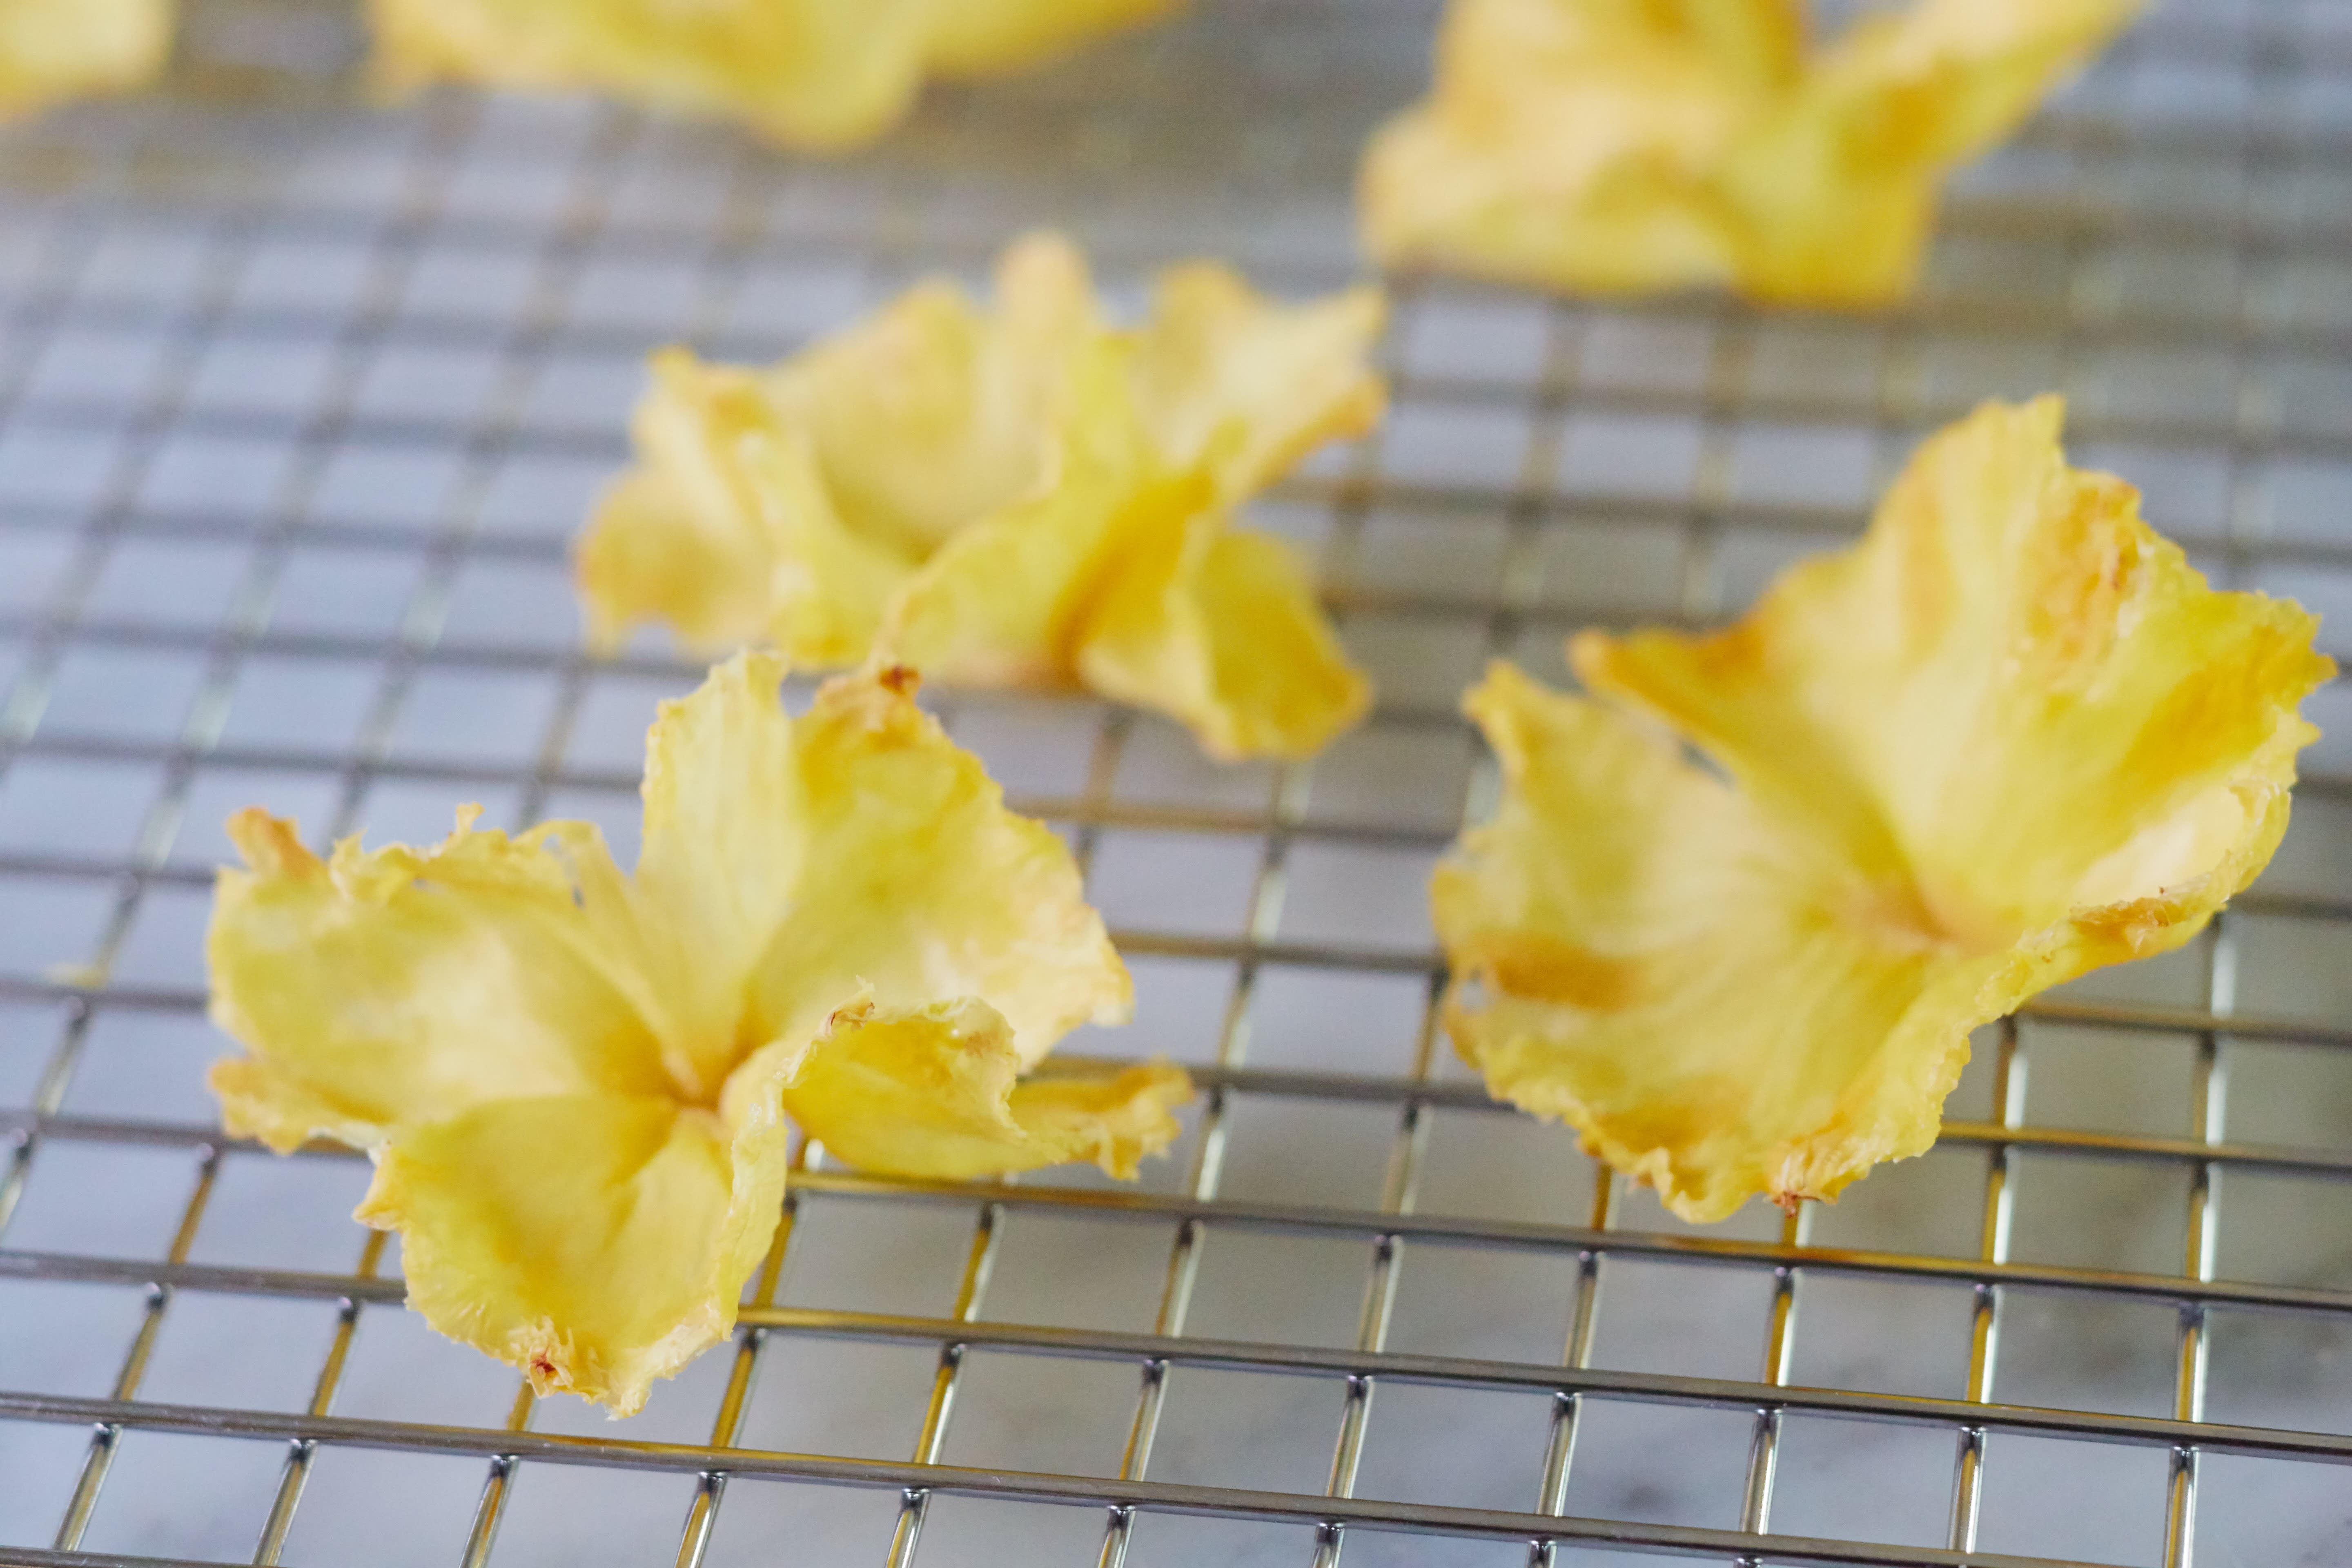 How To Make Dried Pineapple Flowers | The Kitchn